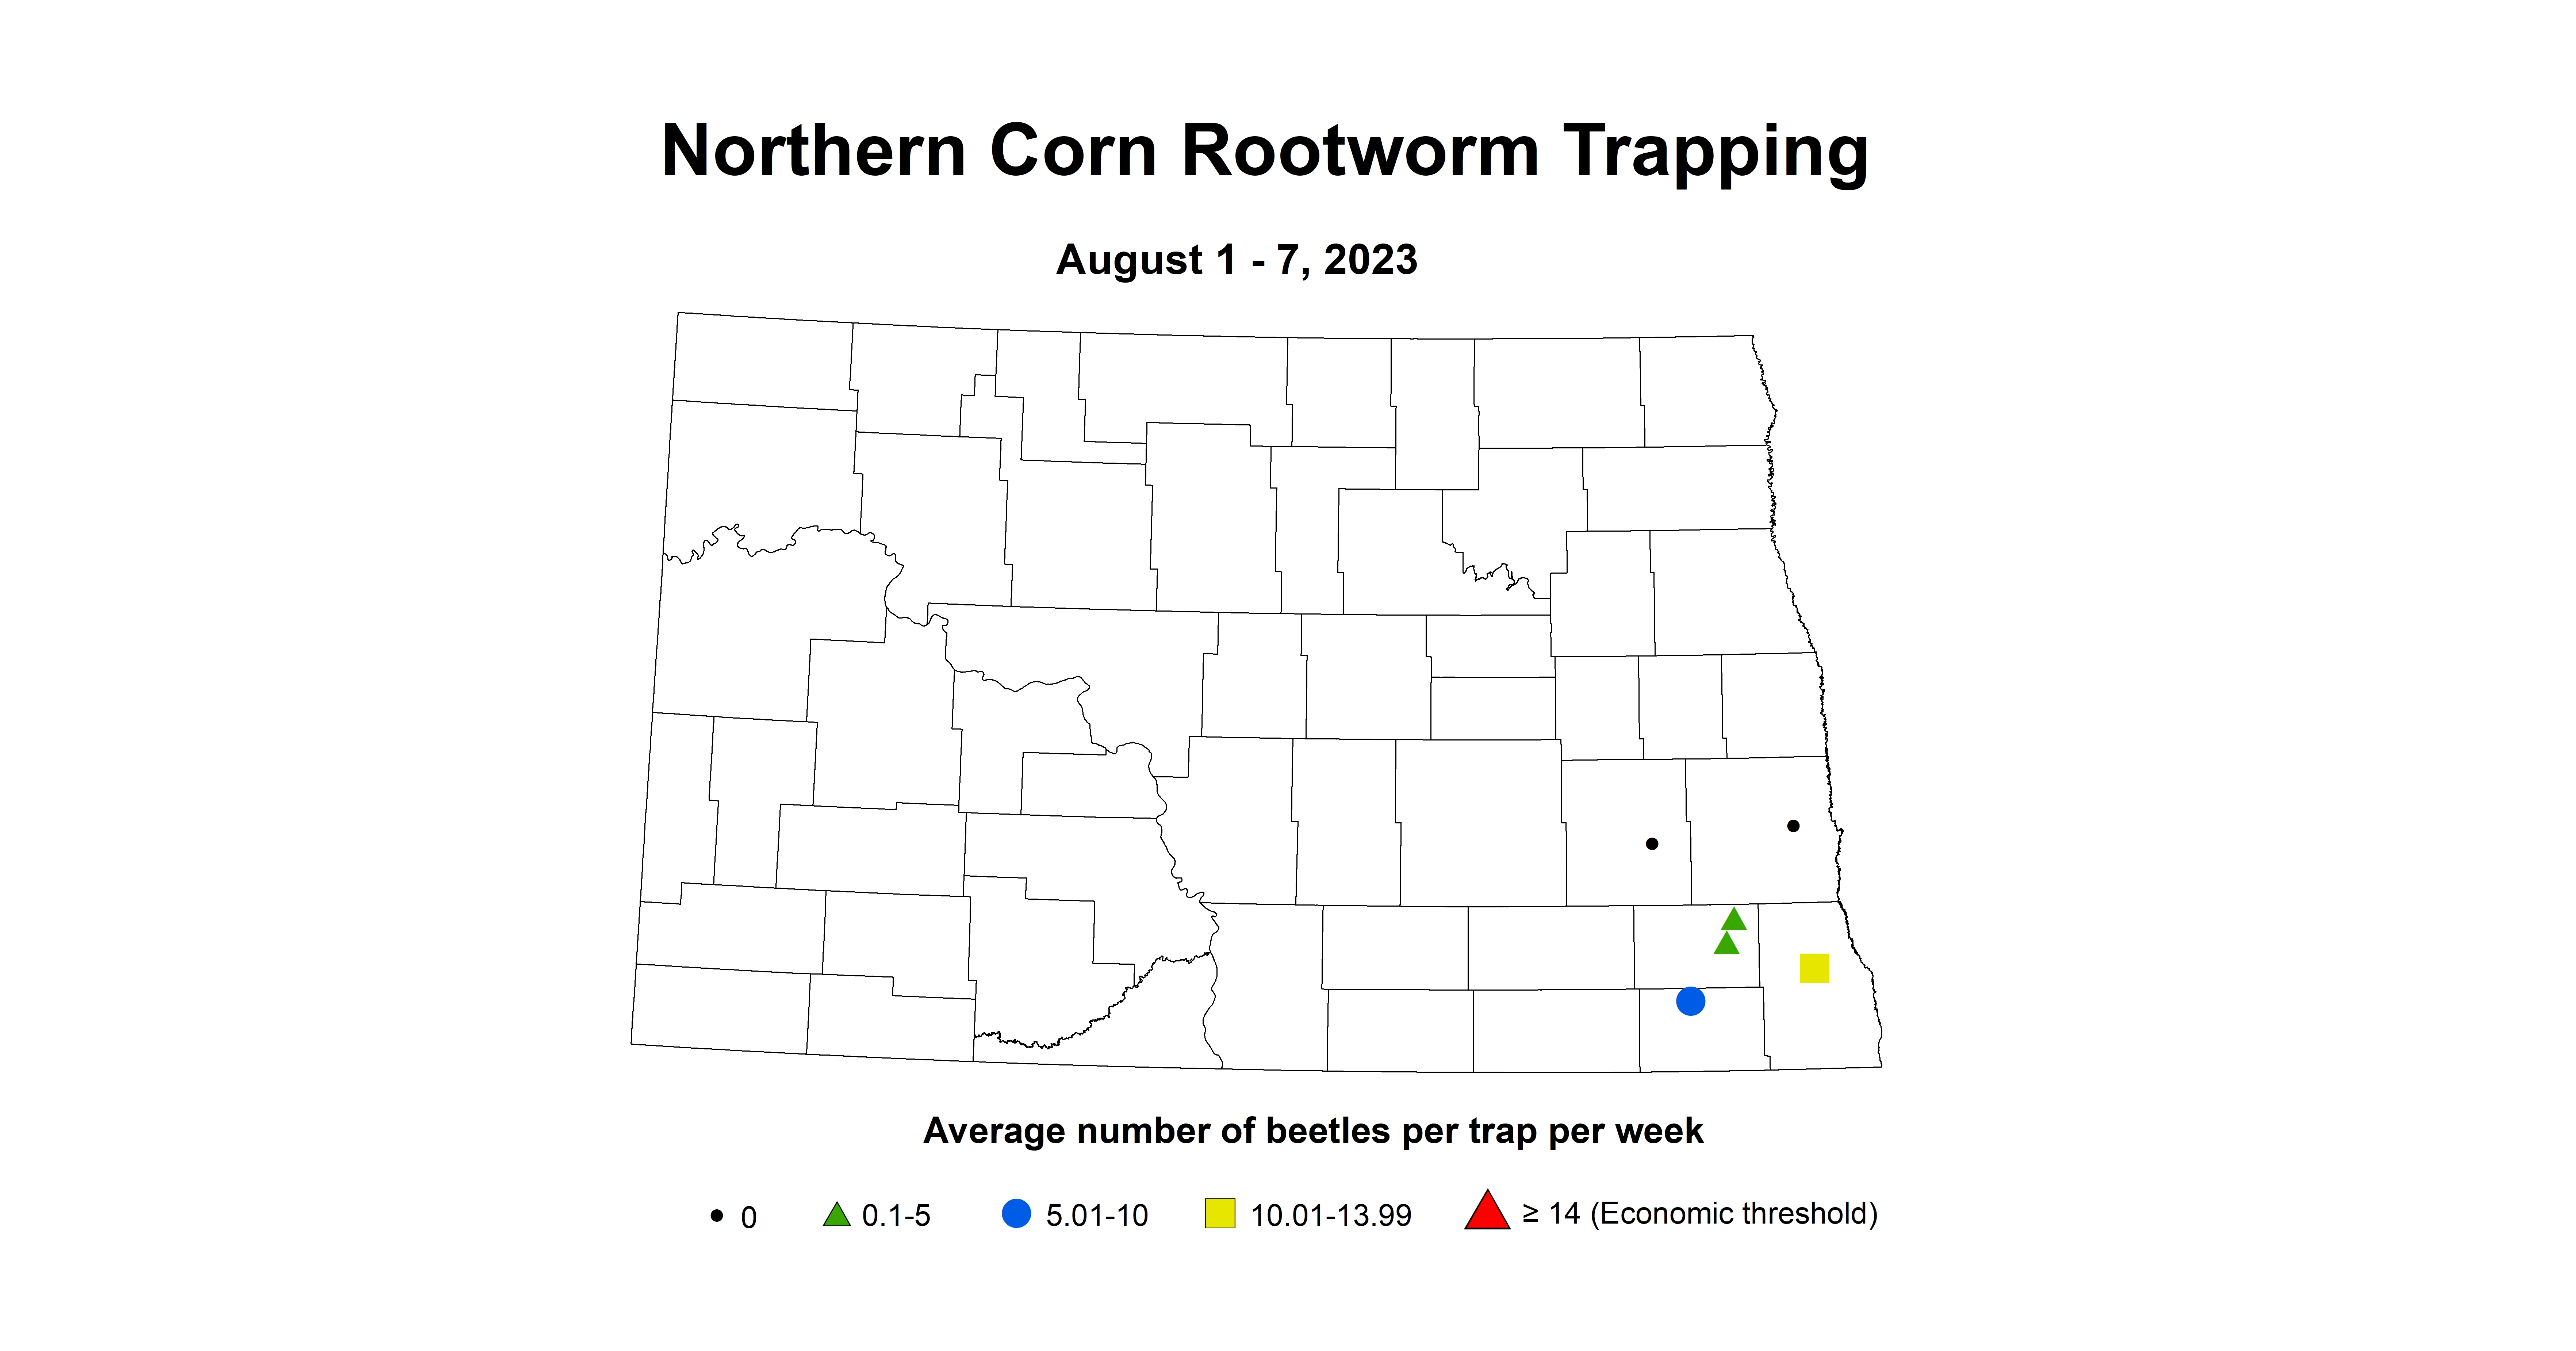 northern corn rootworm August 1 - 7 2023